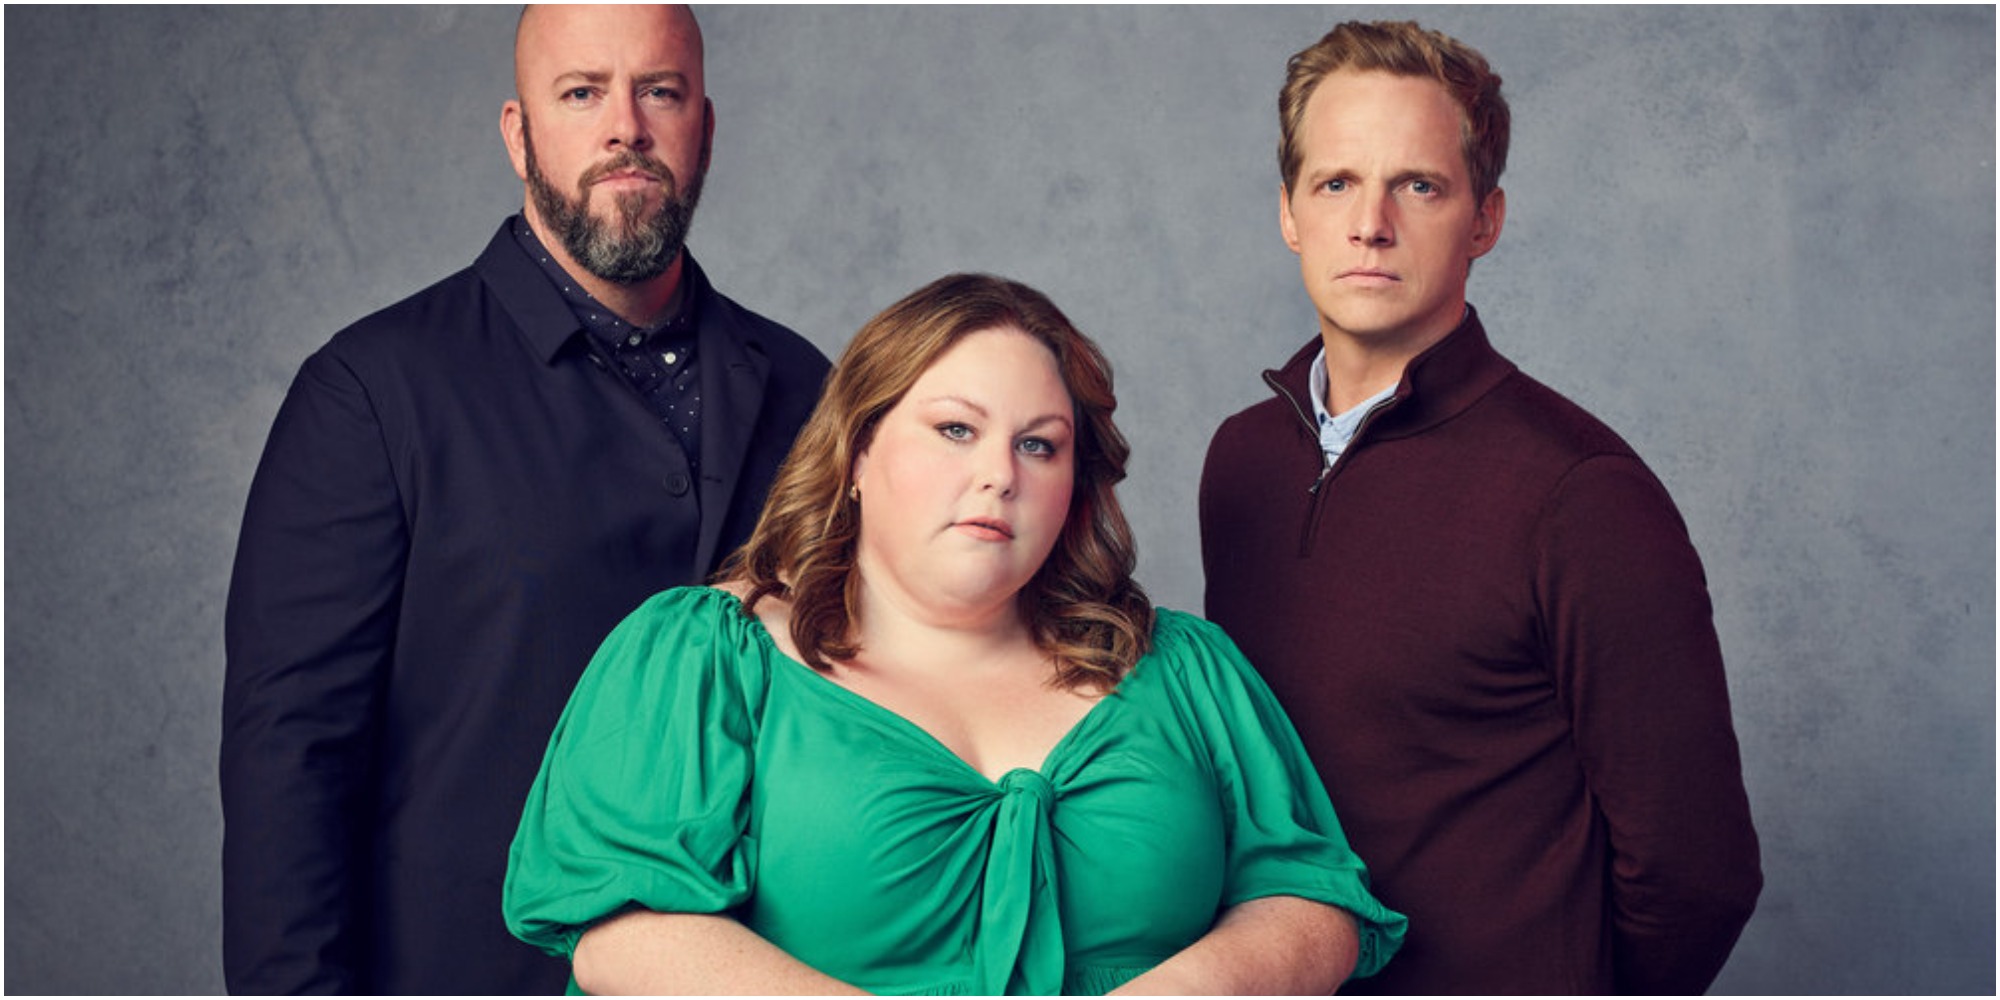 Chris Sullivan, Chrissy Metz and Chris Geere in a publicity still for This Is Us.